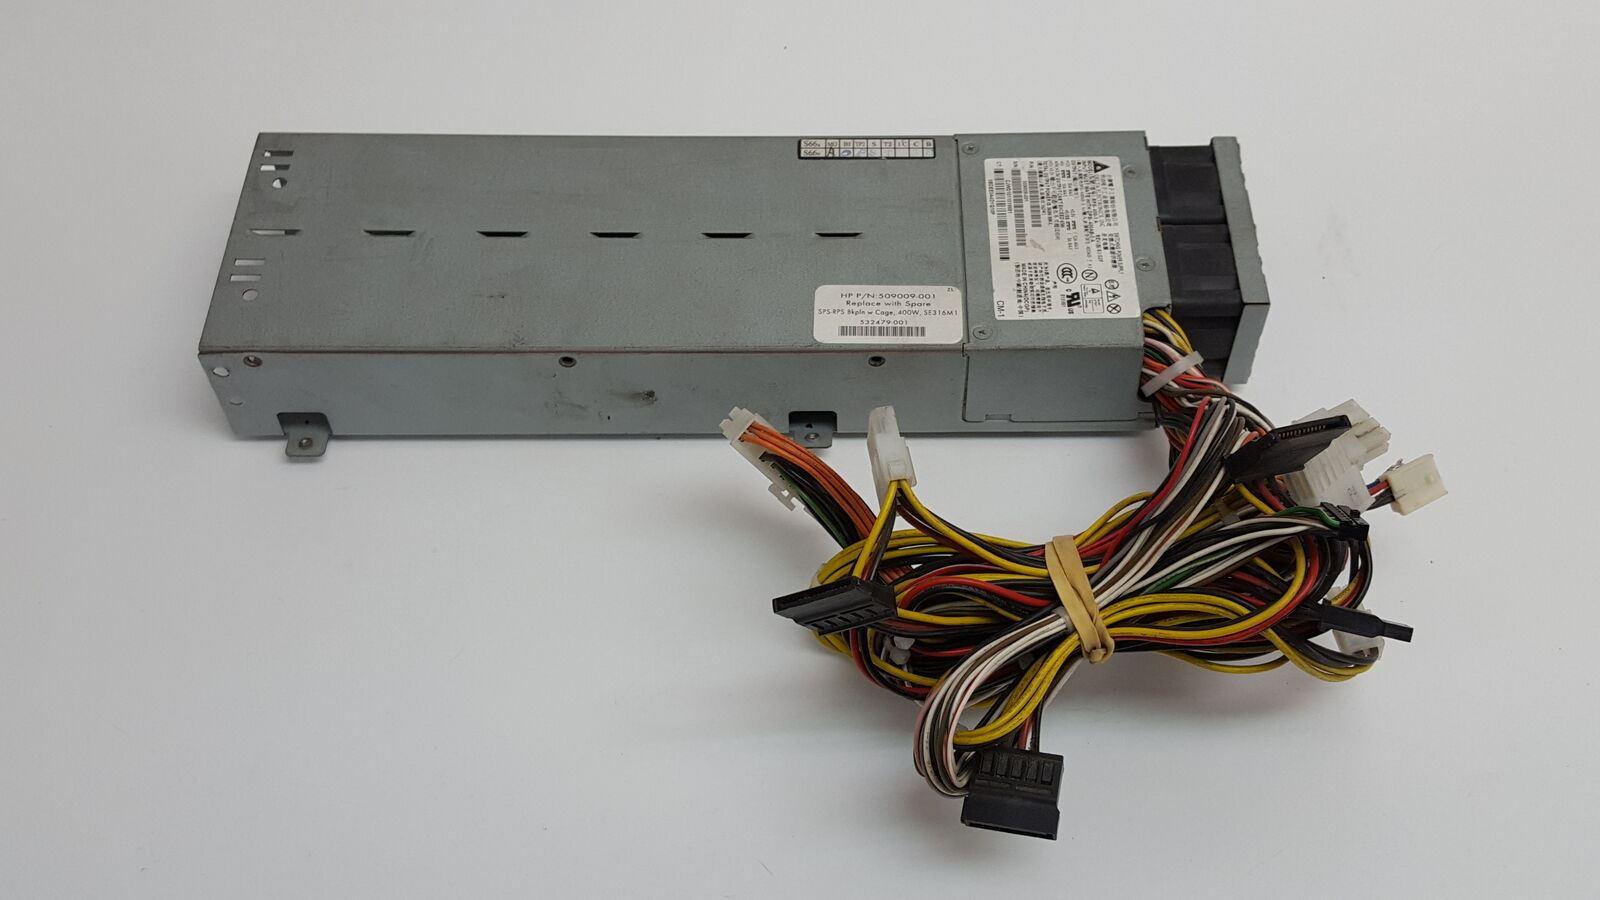 RPS 400 1 DPS 400AB 5 509009 001 hp 509009 001 power supply backplane with cage for proliant dl320 g6